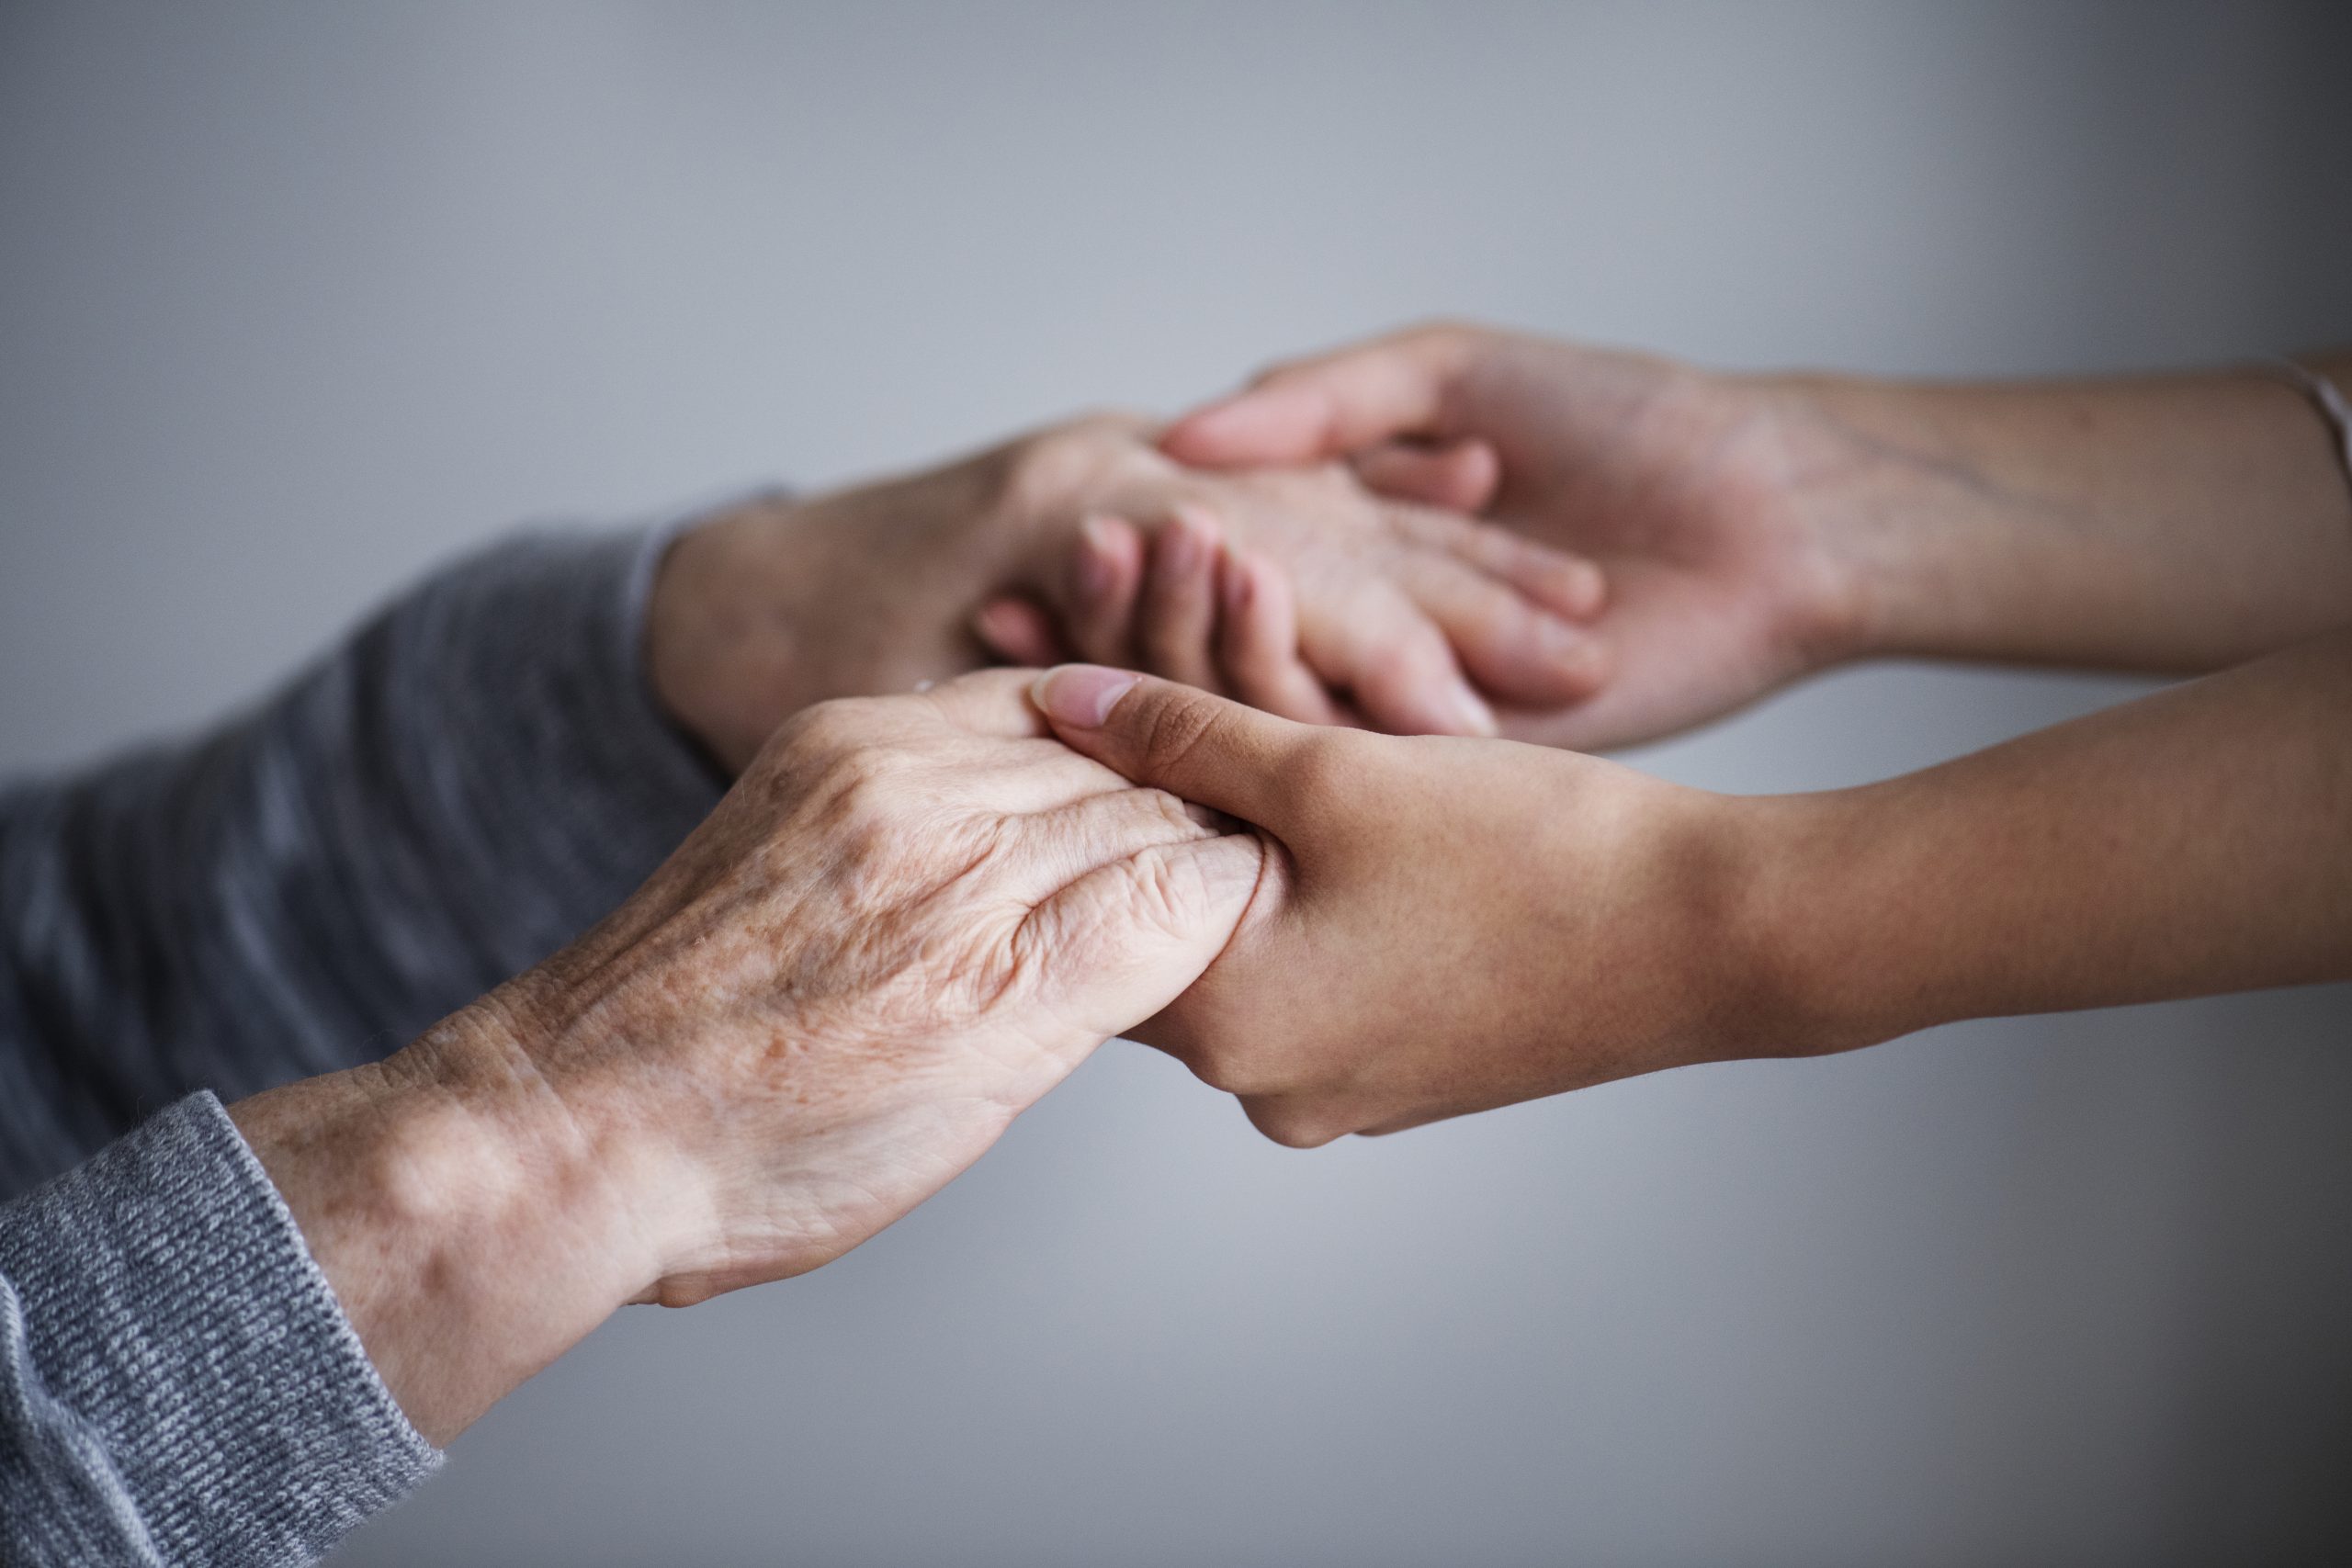 How to Make the Most Out of Your Role as a Caregiver